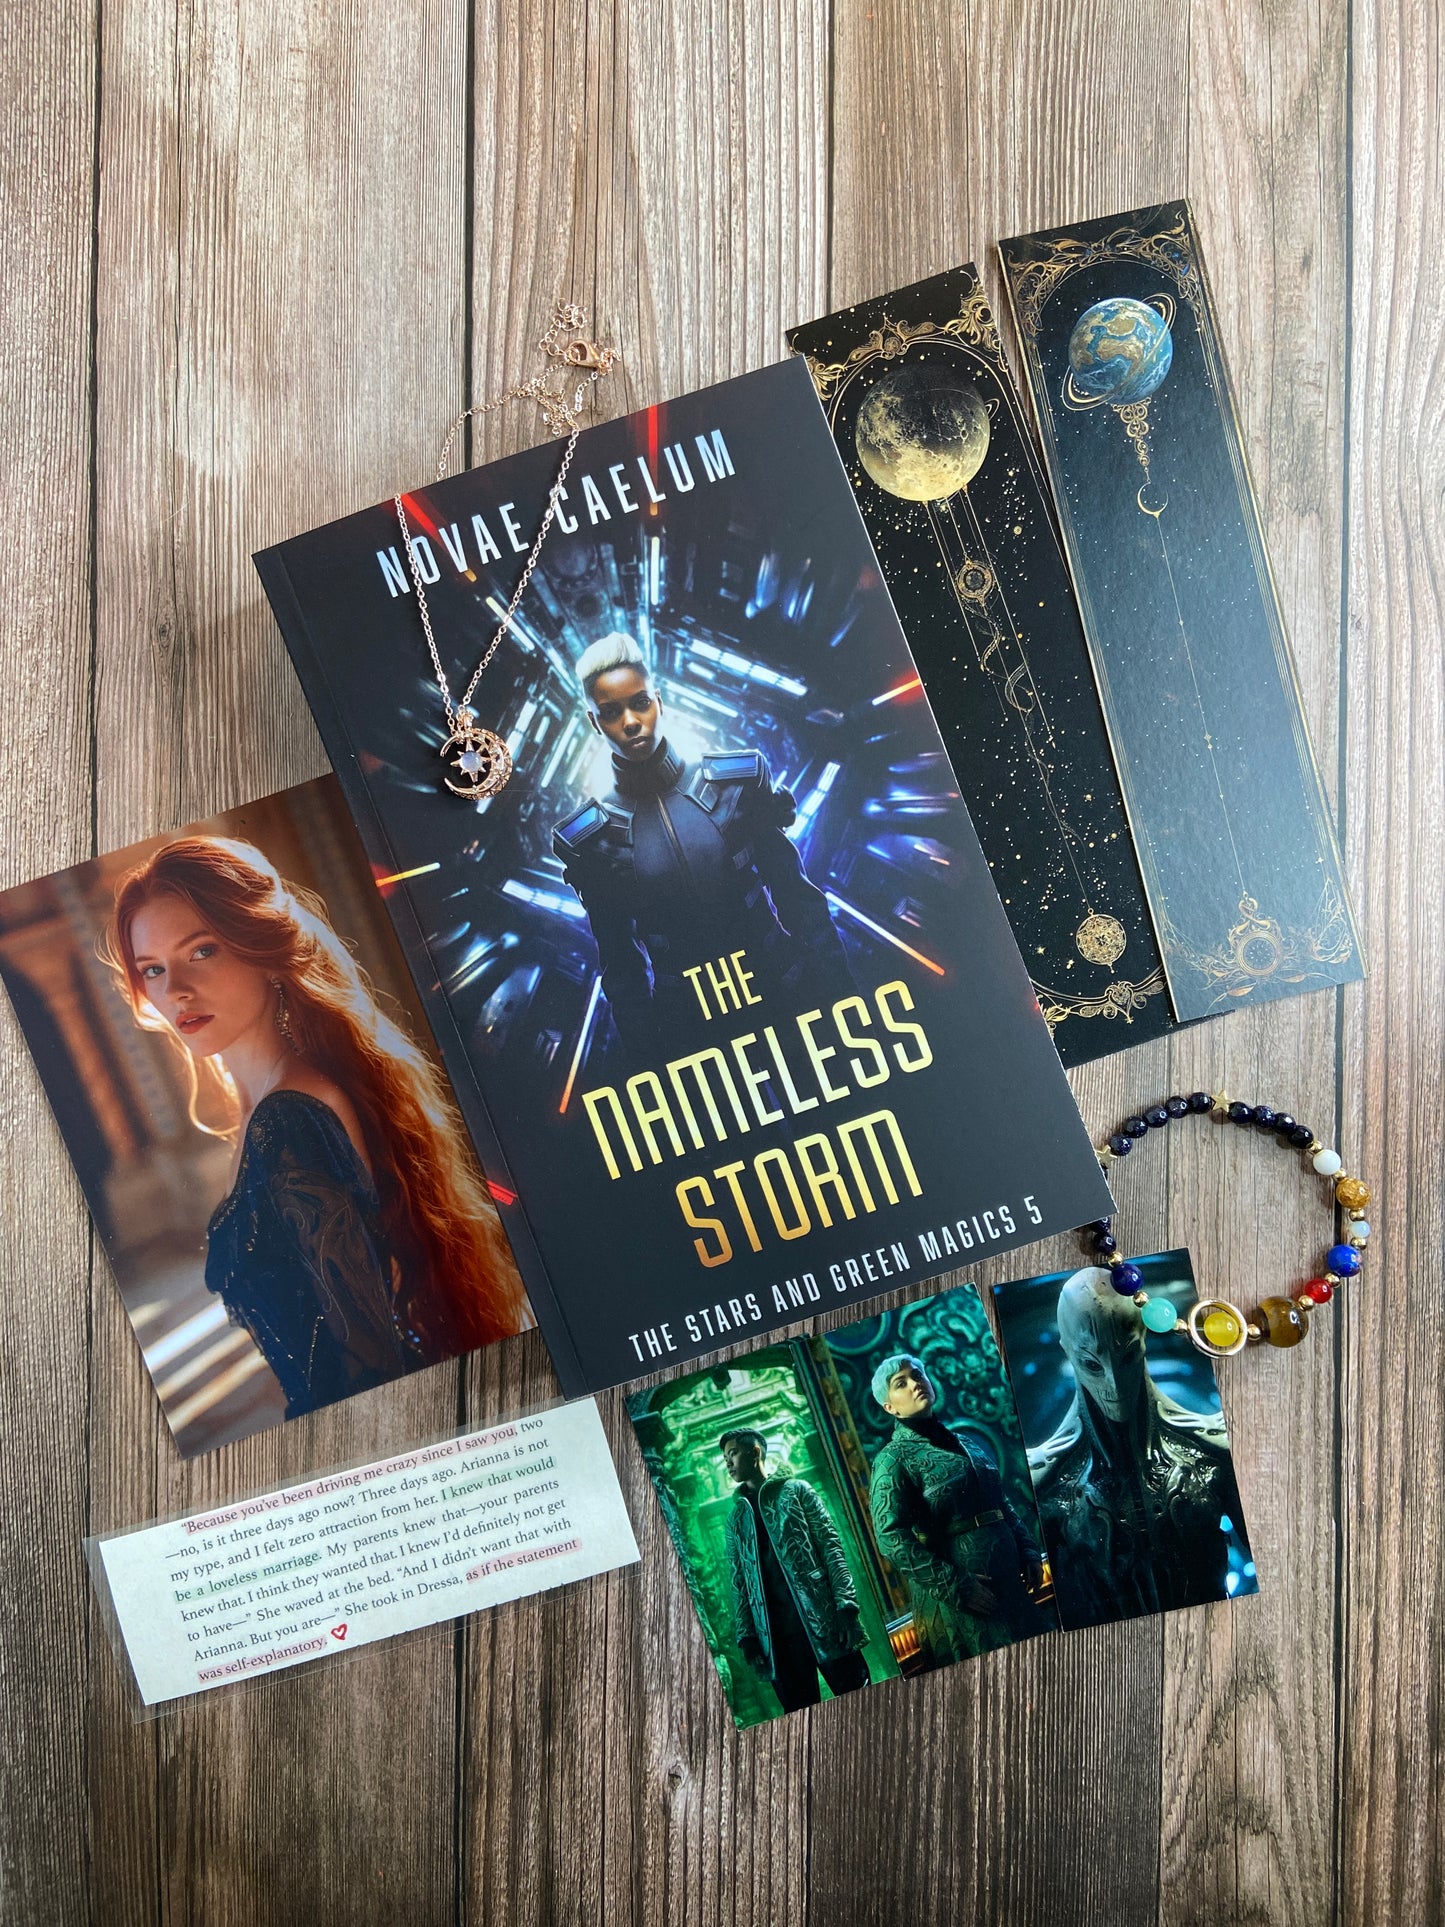 A collection of themed items including a book titled "The Nameless Storm Patreon Exclusive (Not for Sale)," bookmarks, a necklace, and a beaded bracelet arranged on a wooden surface, all within origami wrapped packaging by Novae Caelum.